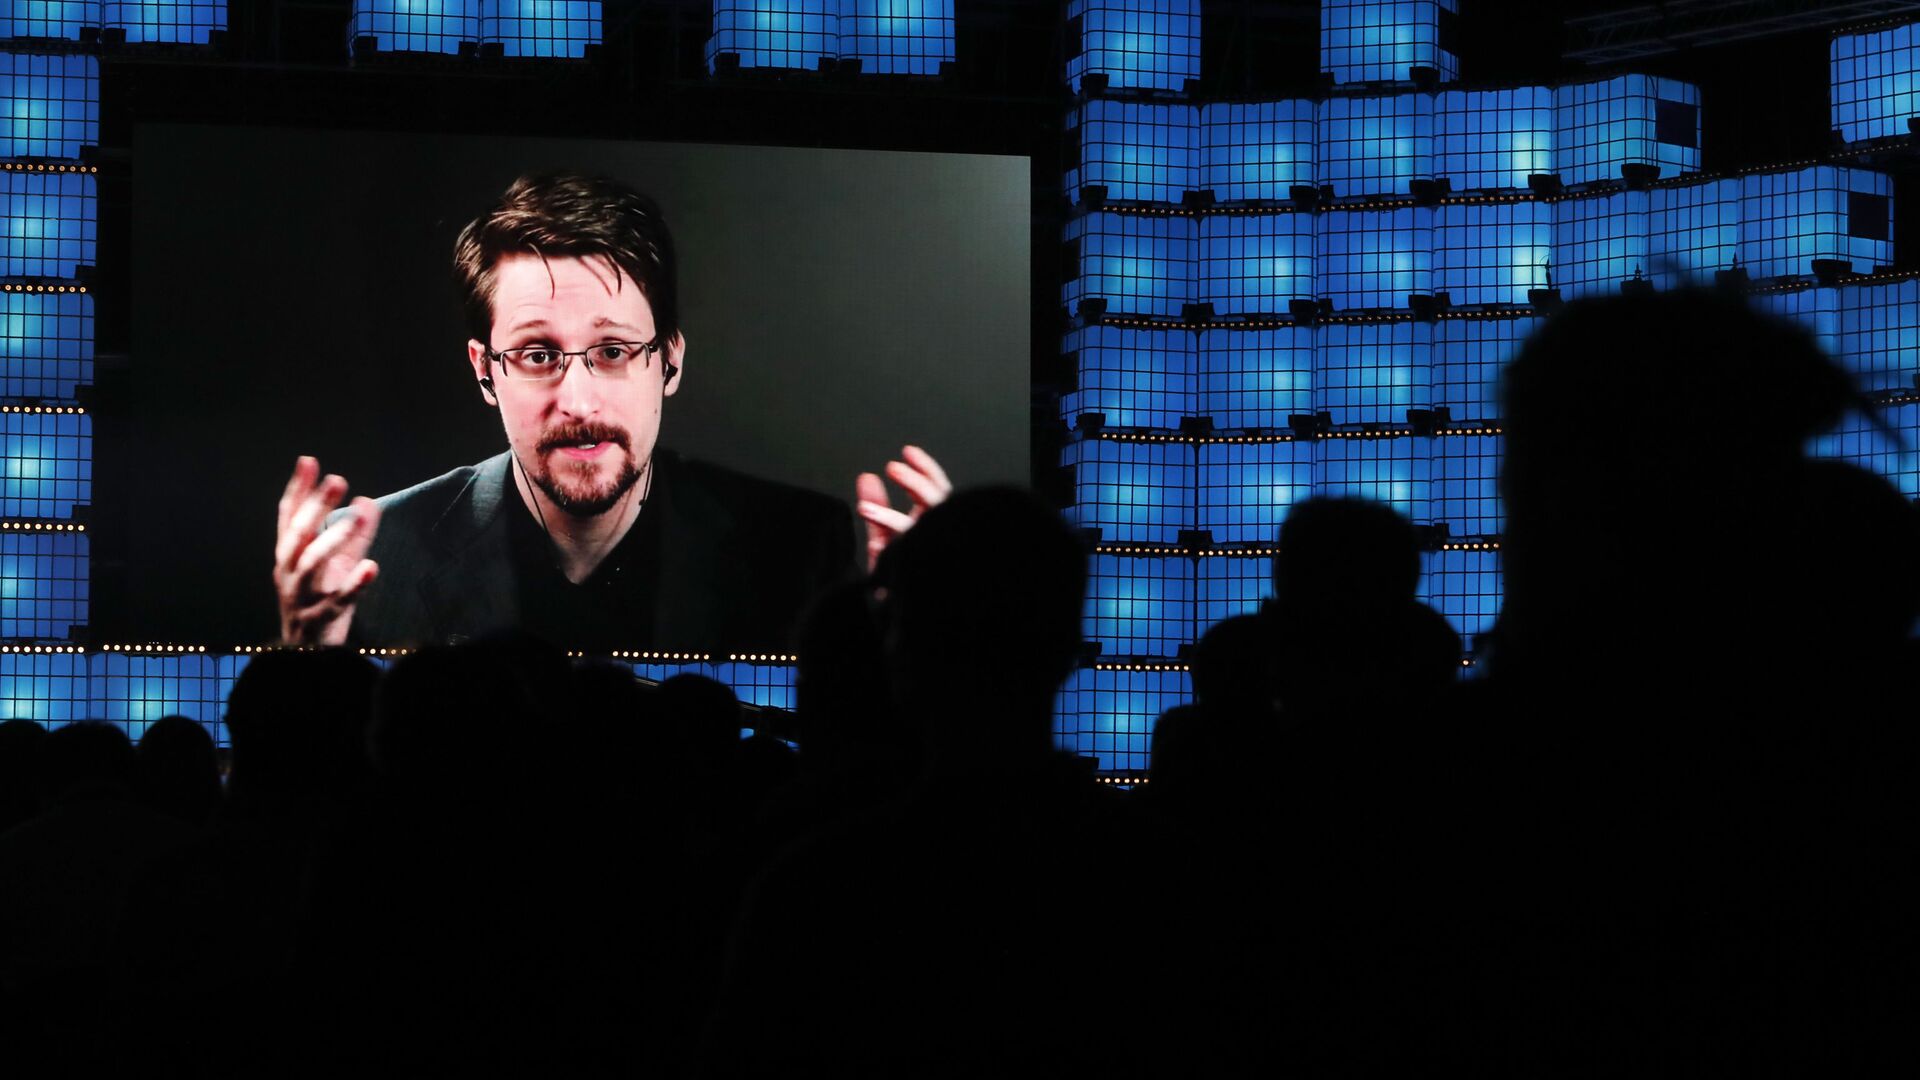 Former U.S. National Security Agency contractor Edward Snowden addresses attendees through video link at the Web Summit technology conference in Lisbon, Monday, Nov. 4, 2019 - Sputnik International, 1920, 10.12.2021